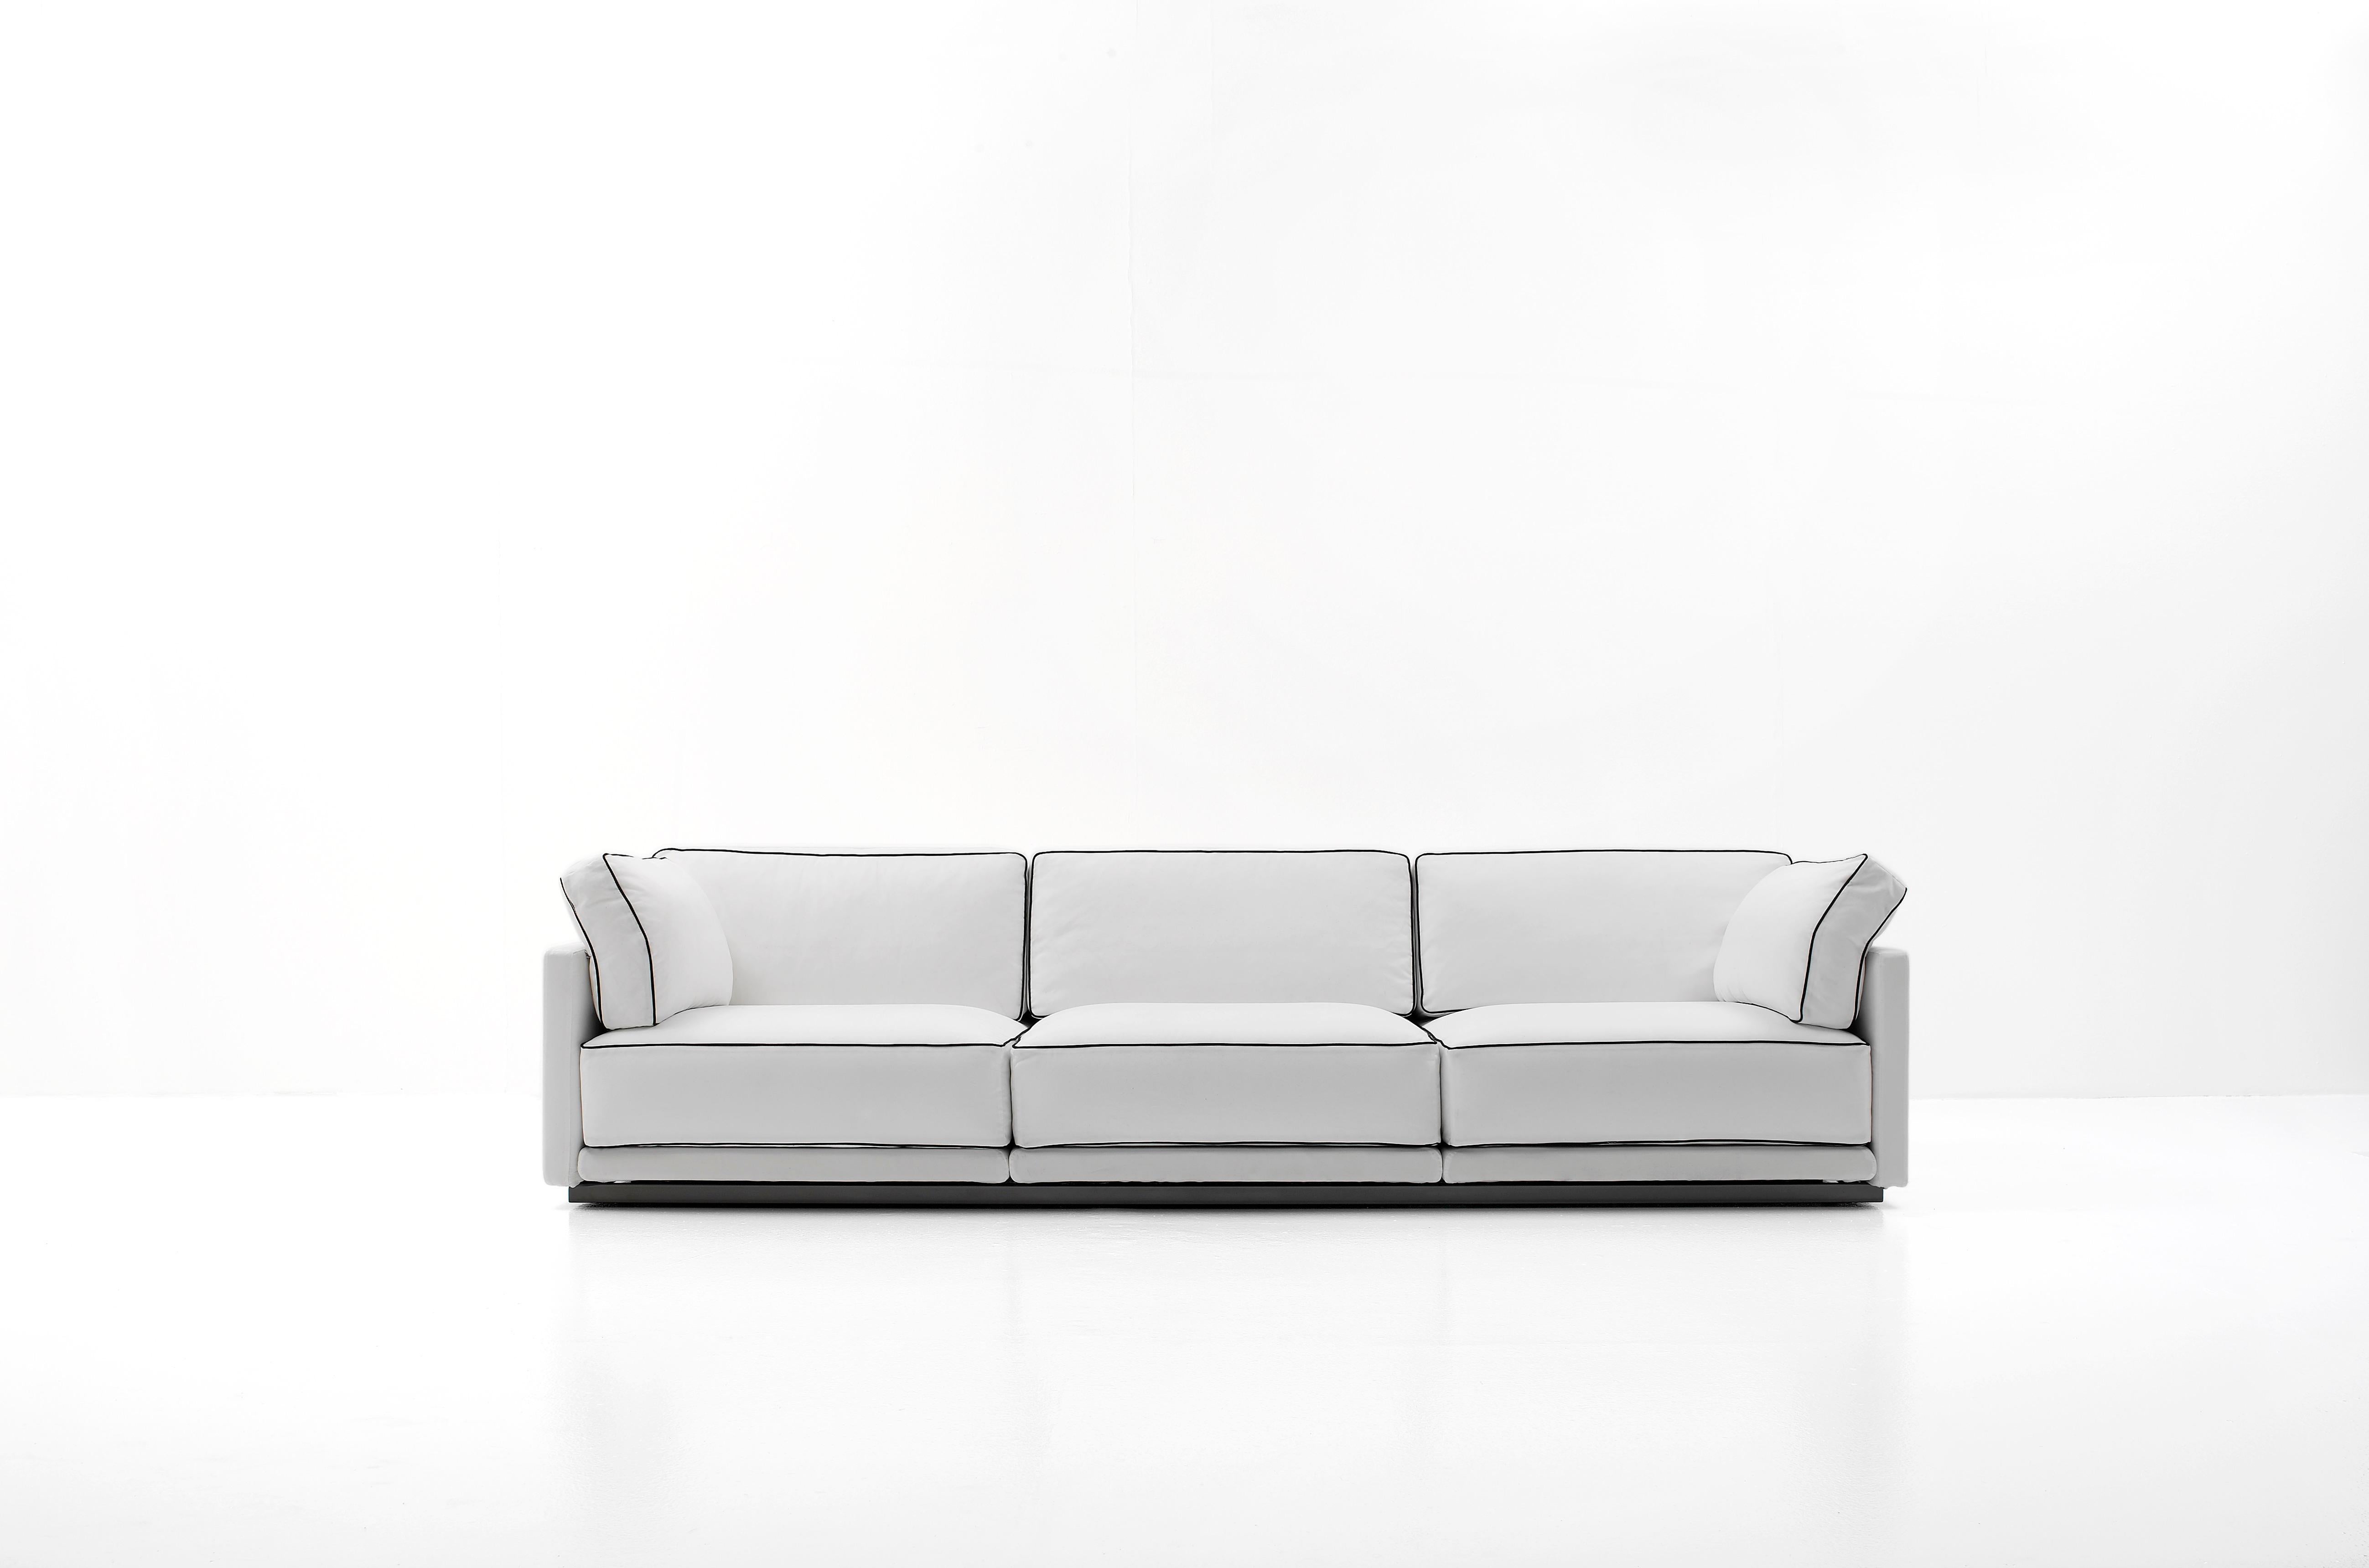 Internal metals base with braided elastic belts. Multi-layered armrests. Seat cushions padding in shape retaining polyurethane foam with a differentiated density. Soft feather back cushions. Sliding moment in each seat. Visible metal base can